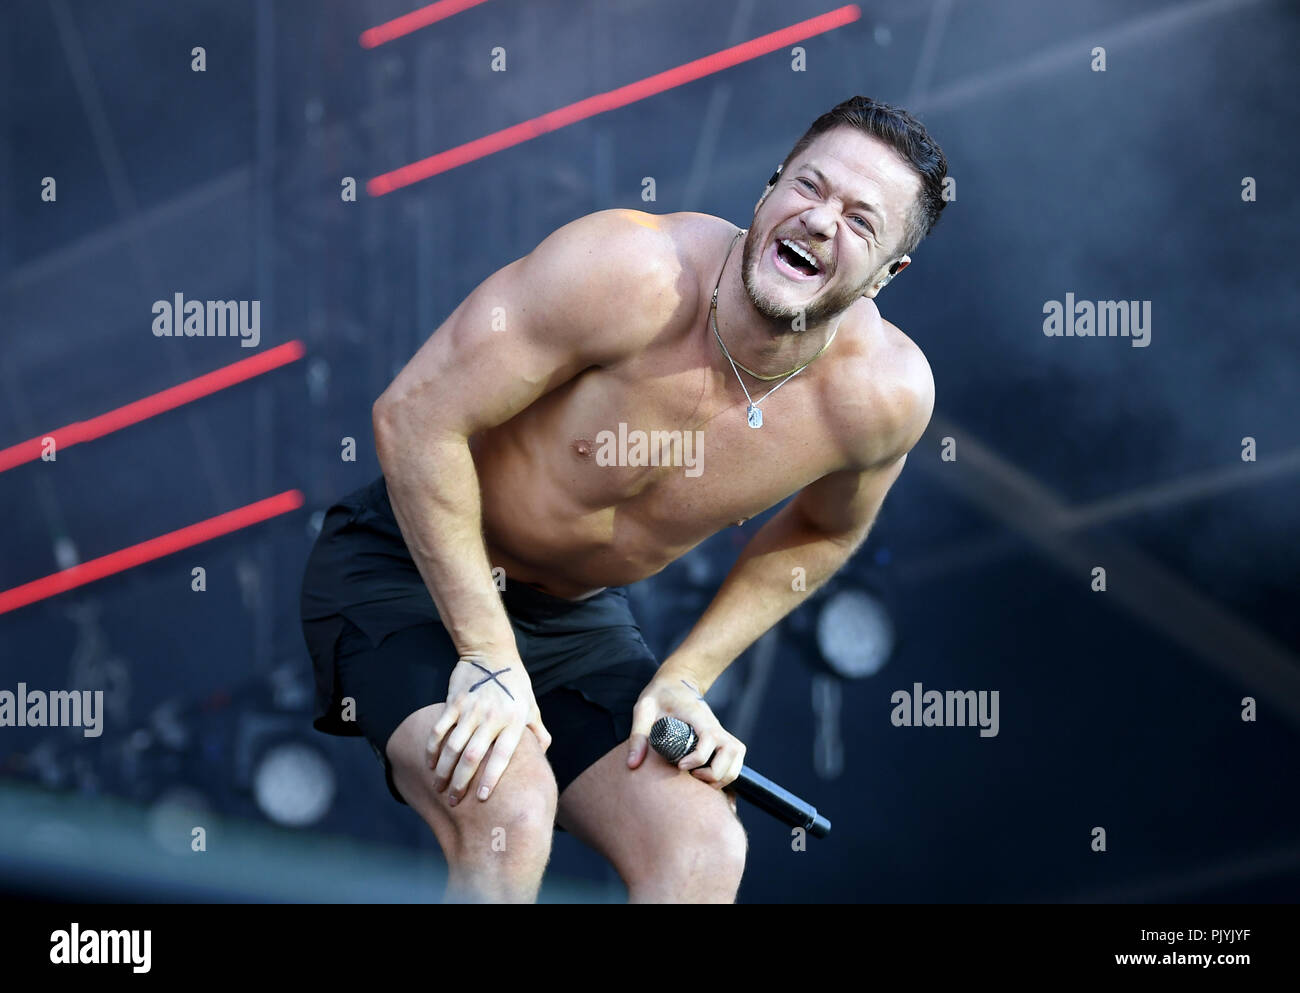 Berlin, Germany. 09th Sep, 2018. Dan Reynolds, singer of the American rock band Imagine Dragons, performing on stage at the music festival Lollapalooza on the grounds of the Olympic Park. Credit: Britta Pedersen/dpa-Zentralbild/dpa/Alamy Live News Stock Photo